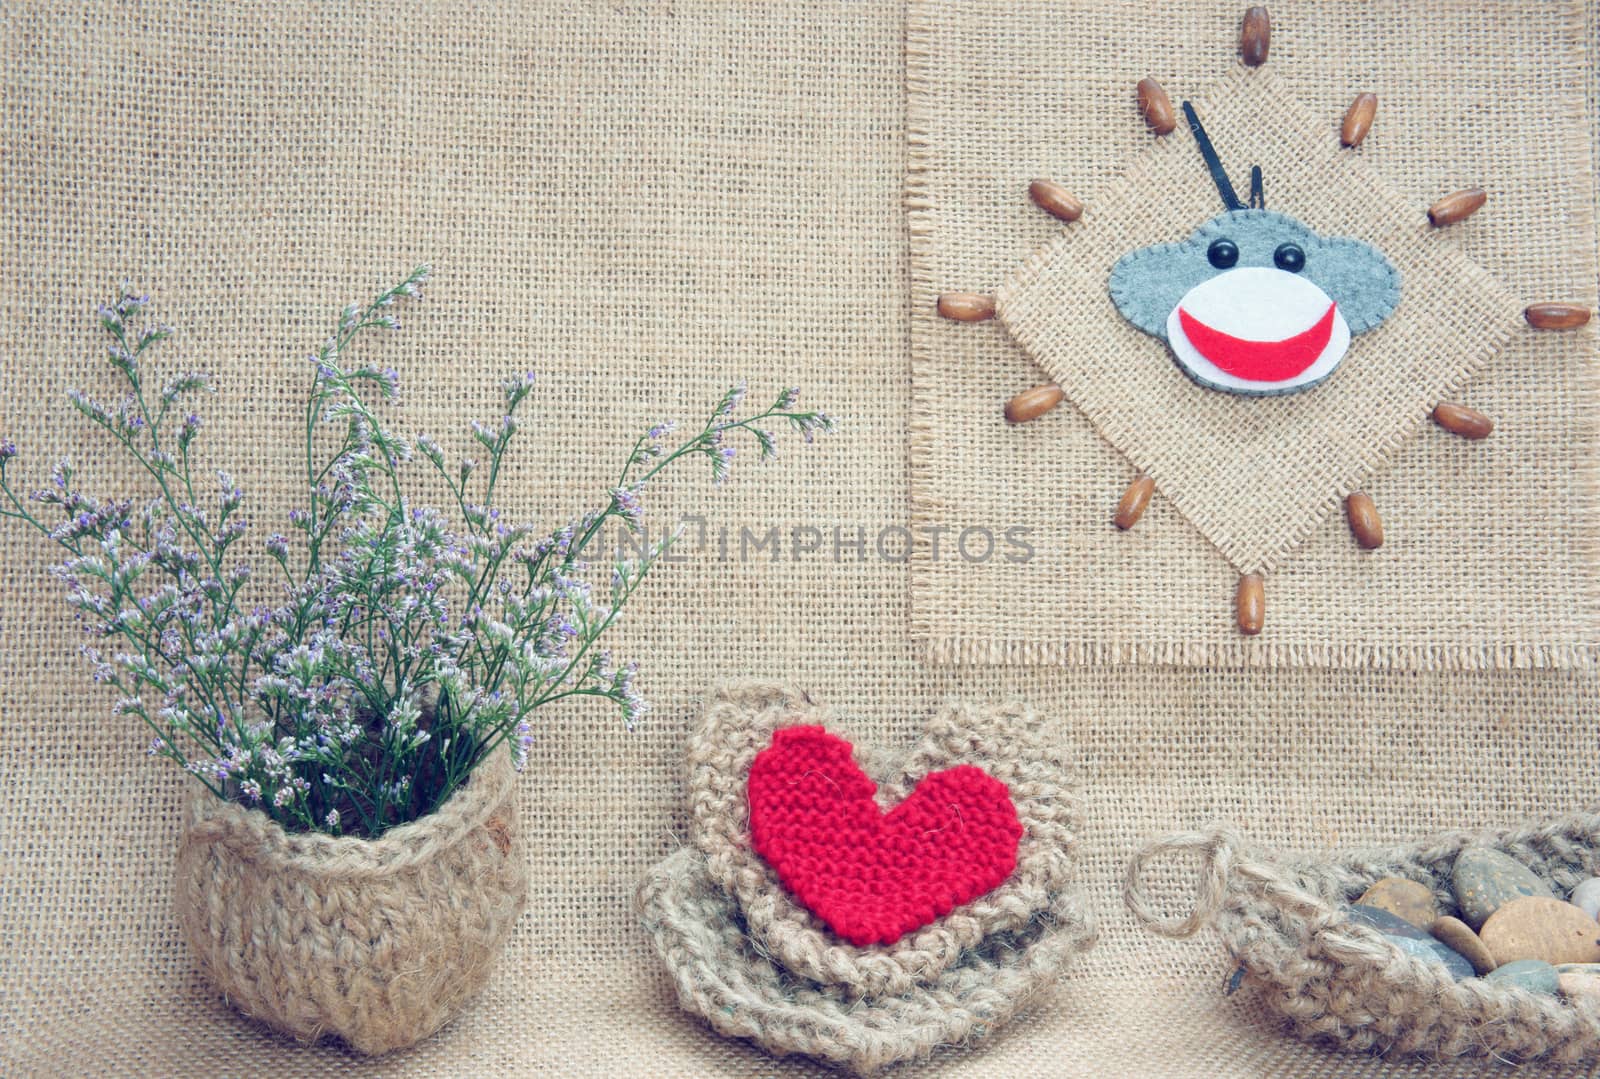 Art idea with funny monkey for happy new year 2016, new year eve time, handmade monkey face, clockwise on hand made clock, heart, flower decor on burlap background, vintage concept